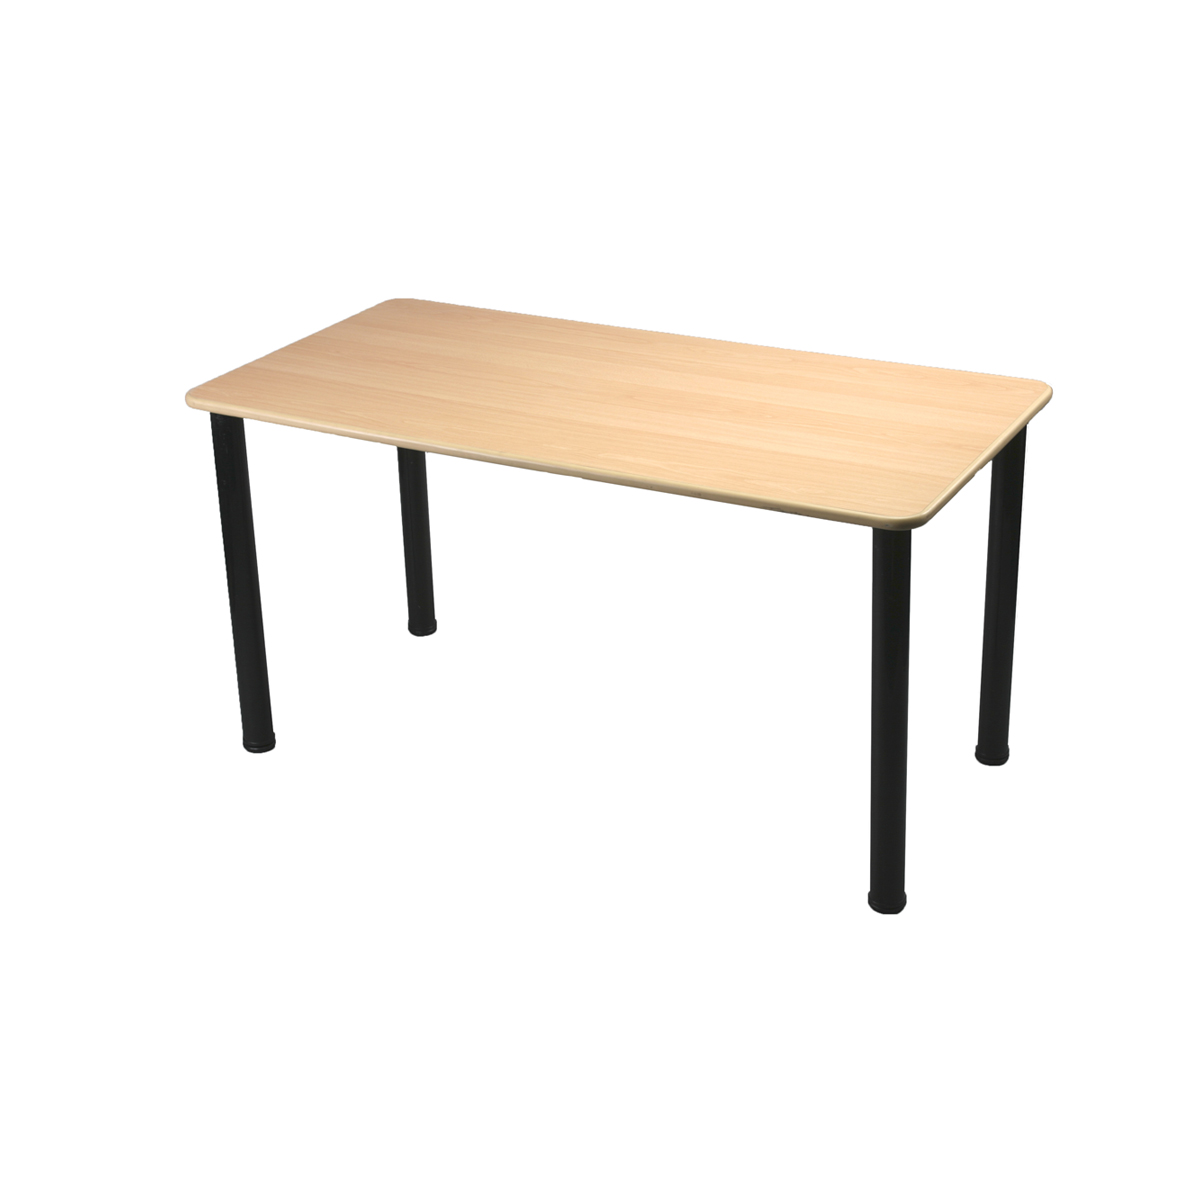 Stanford Table Black / Beech